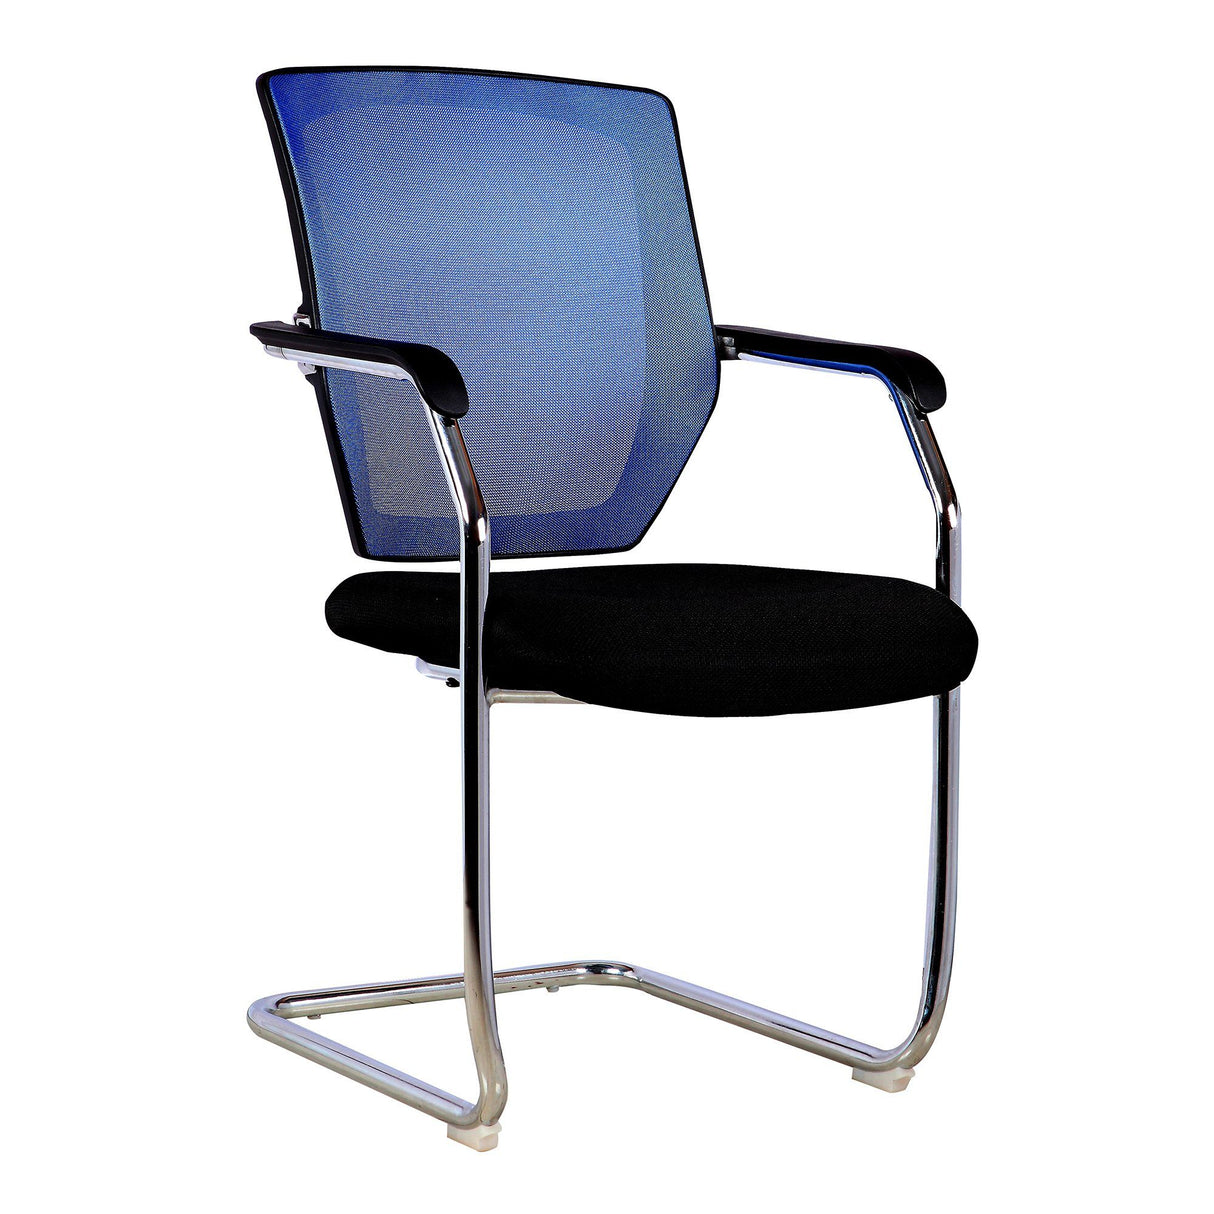 Nautilus Designs Nexus Medium Back Two Tone Designer Mesh Visitor Chair with Sculptured Lumbar, Spine Support and Integrated Armrests - Blue